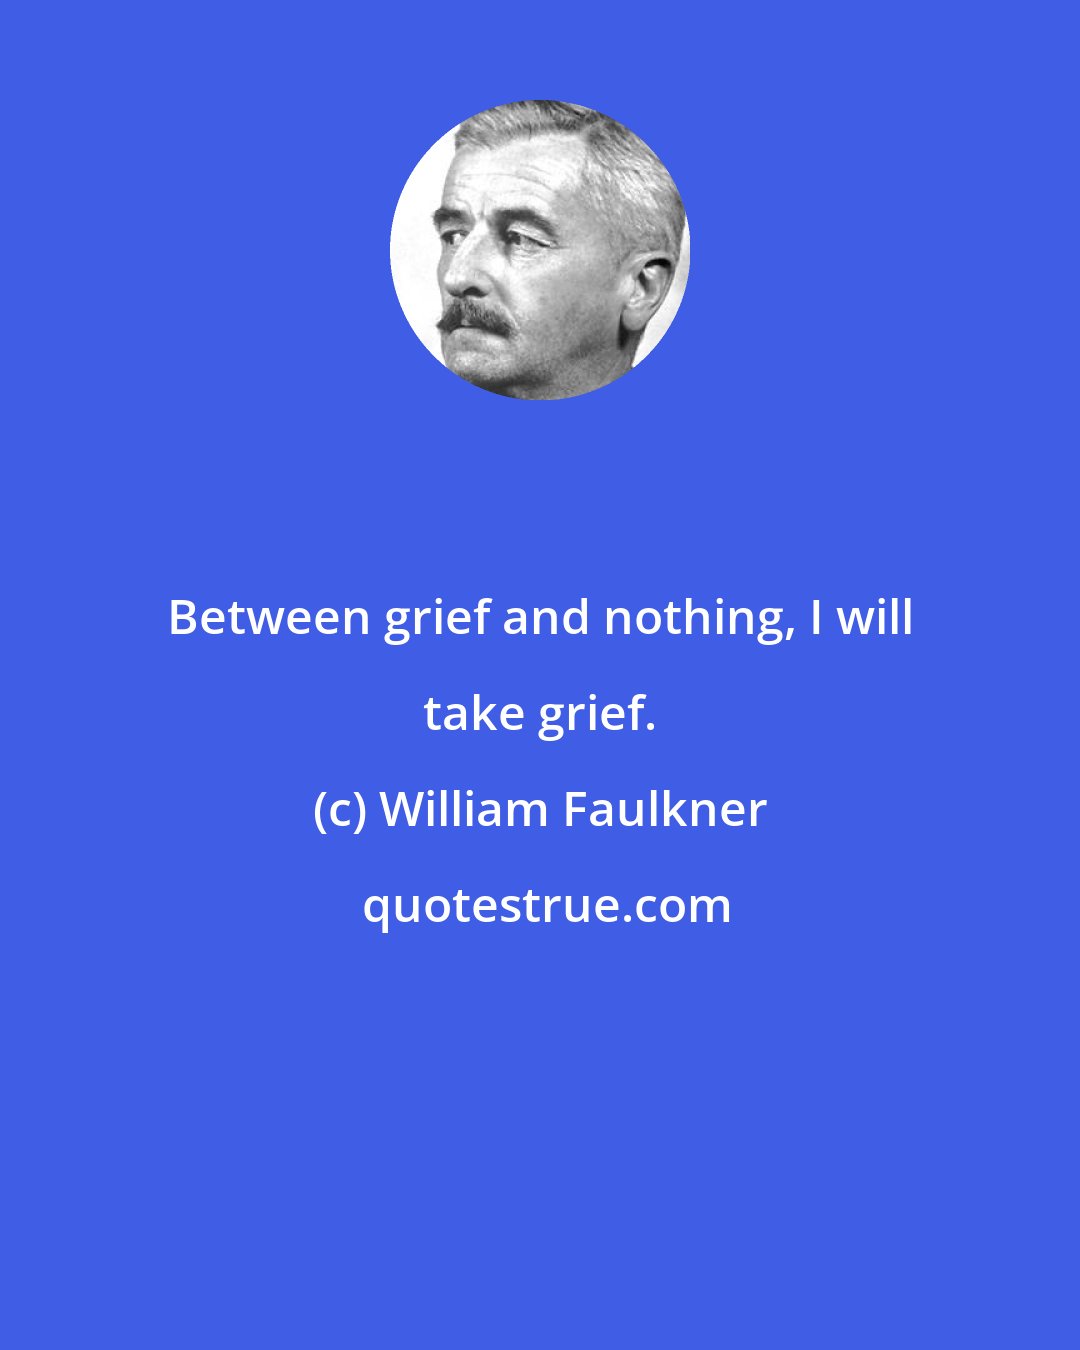 William Faulkner: Between grief and nothing, I will take grief.